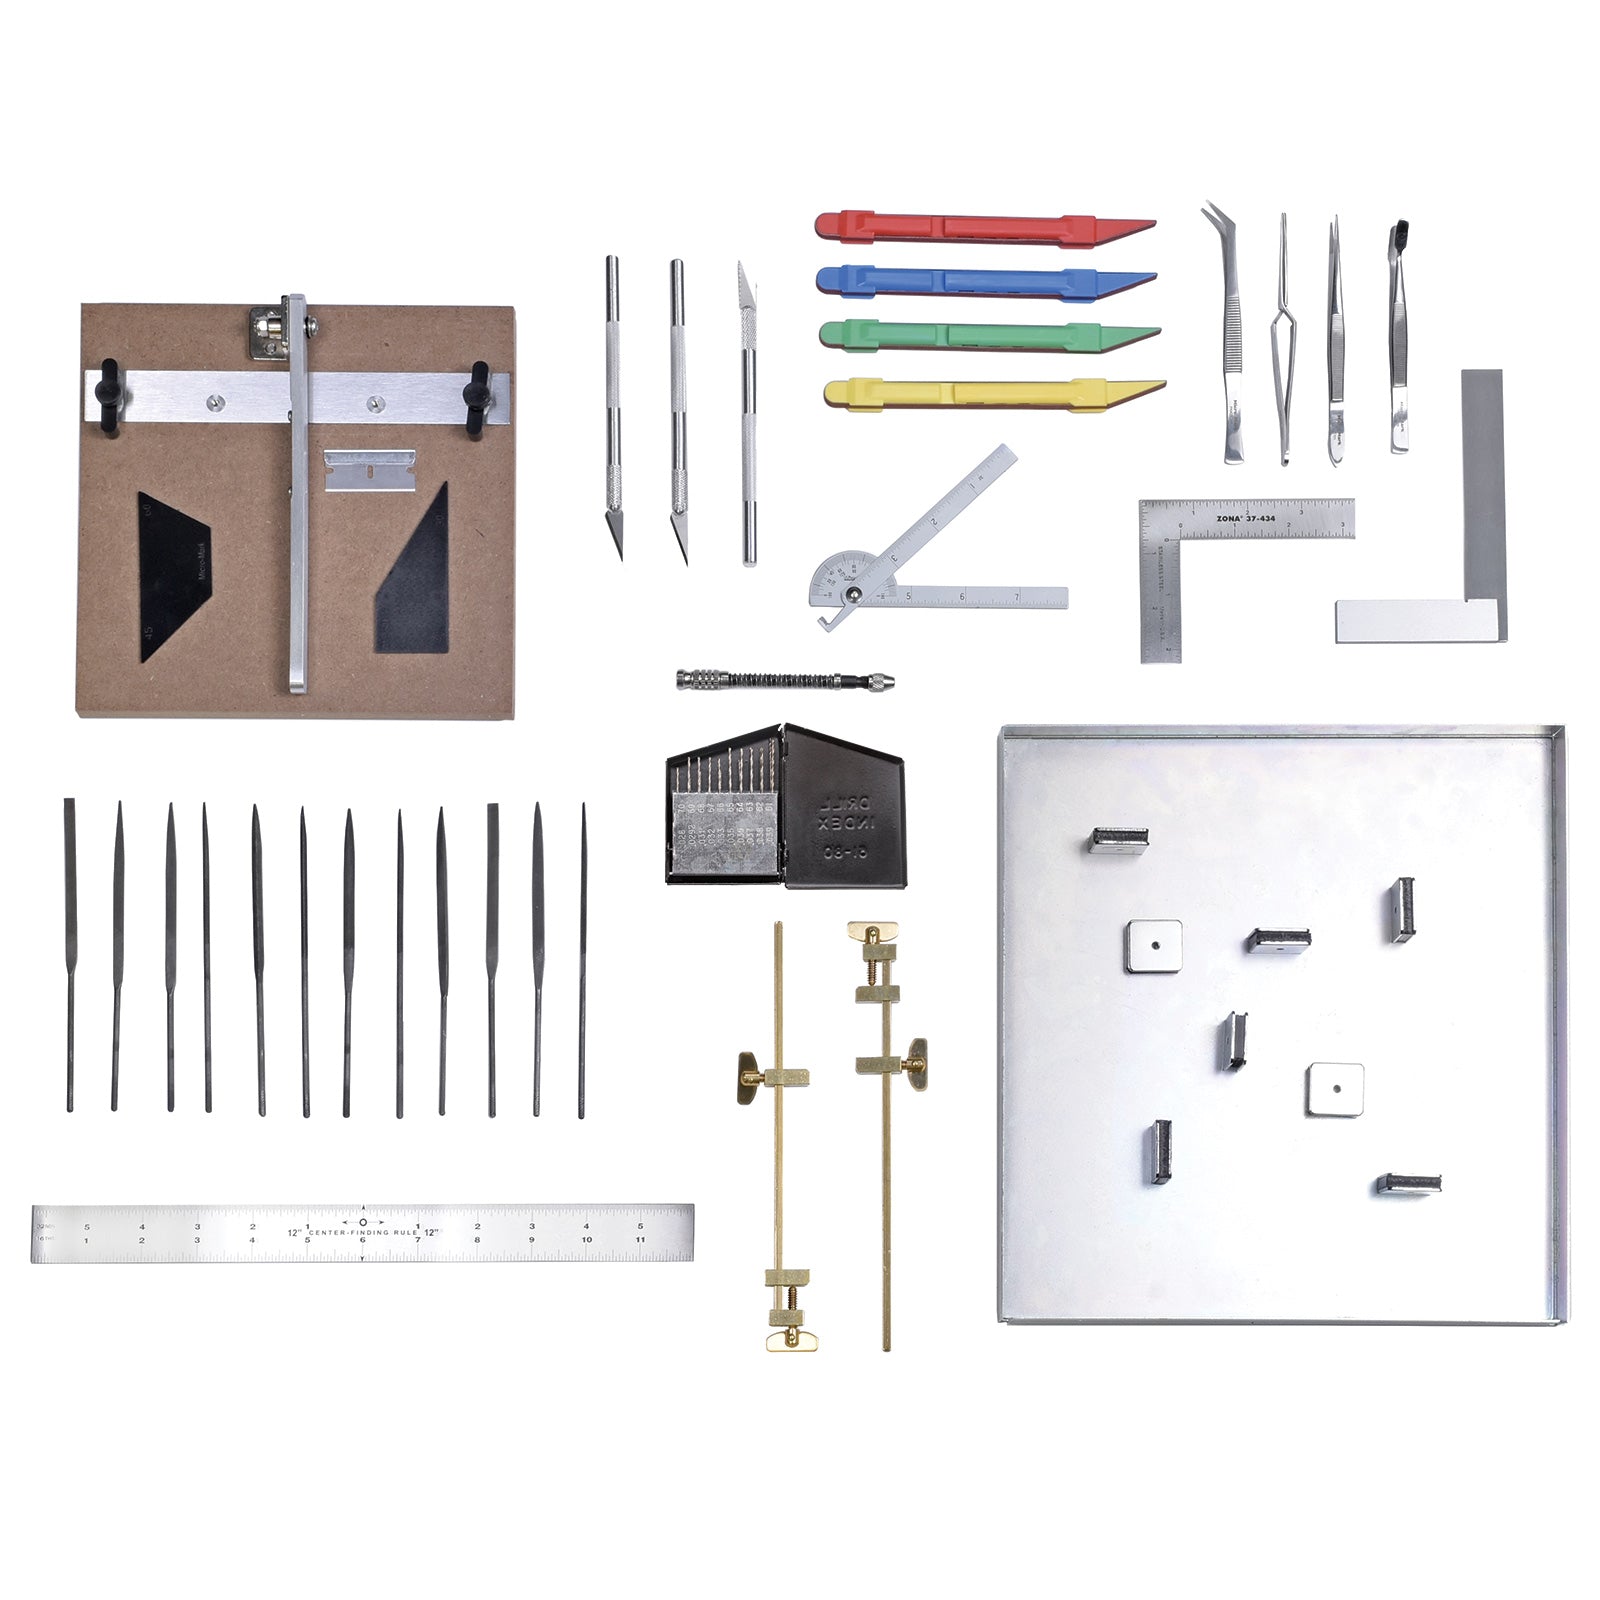 Model Structure Builder's Super Value Package - Micro - Mark Hardware